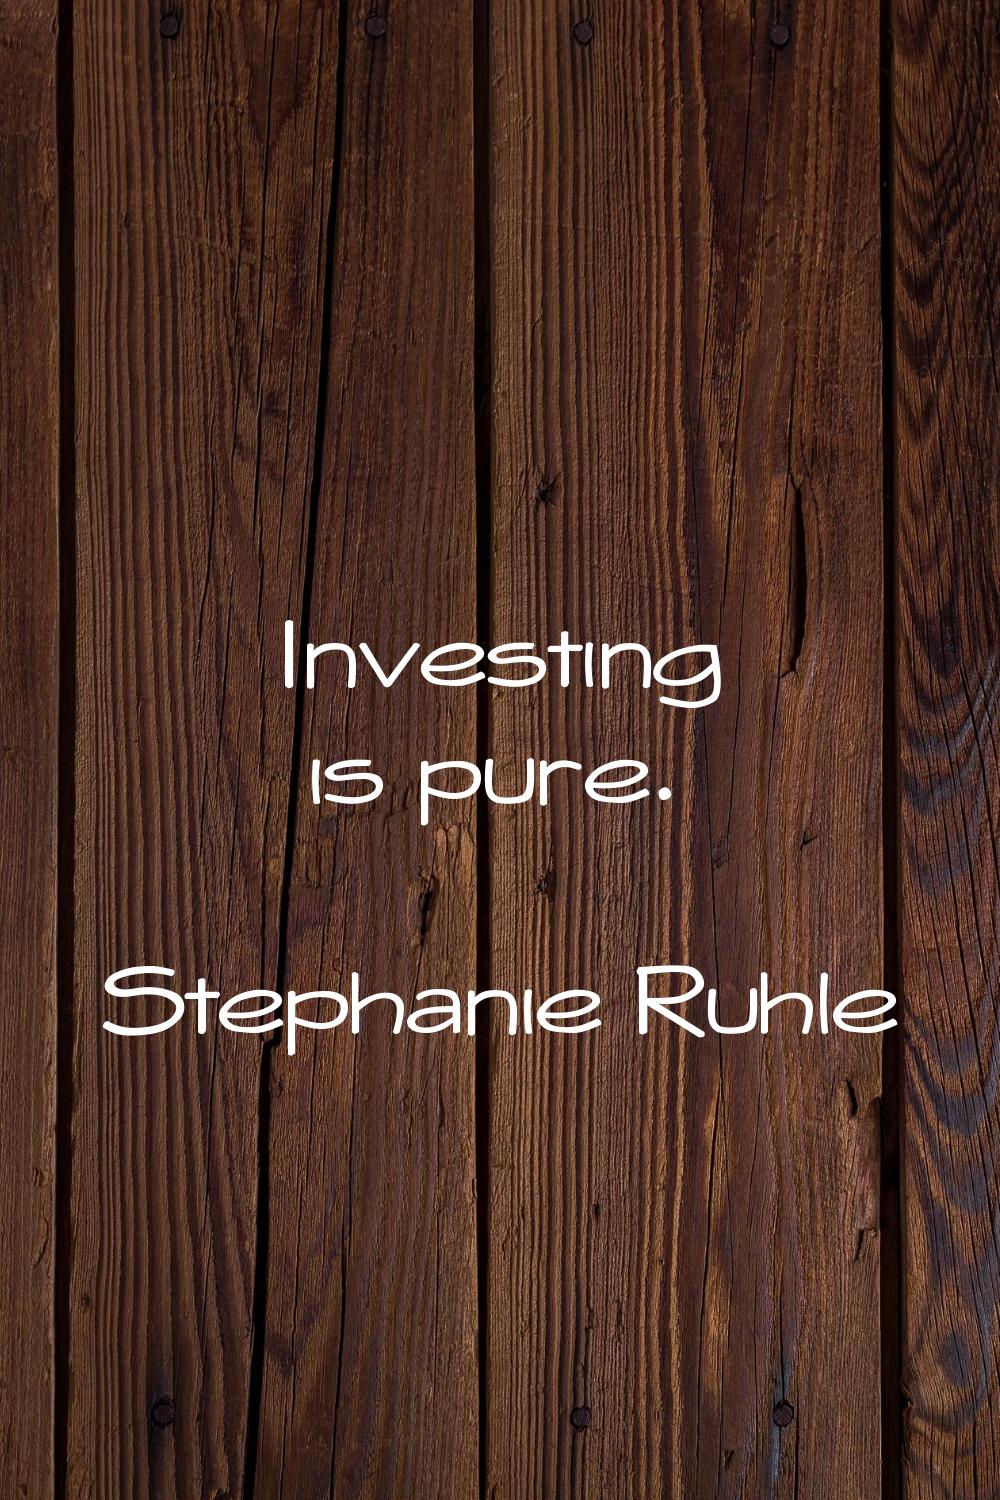 Investing is pure.